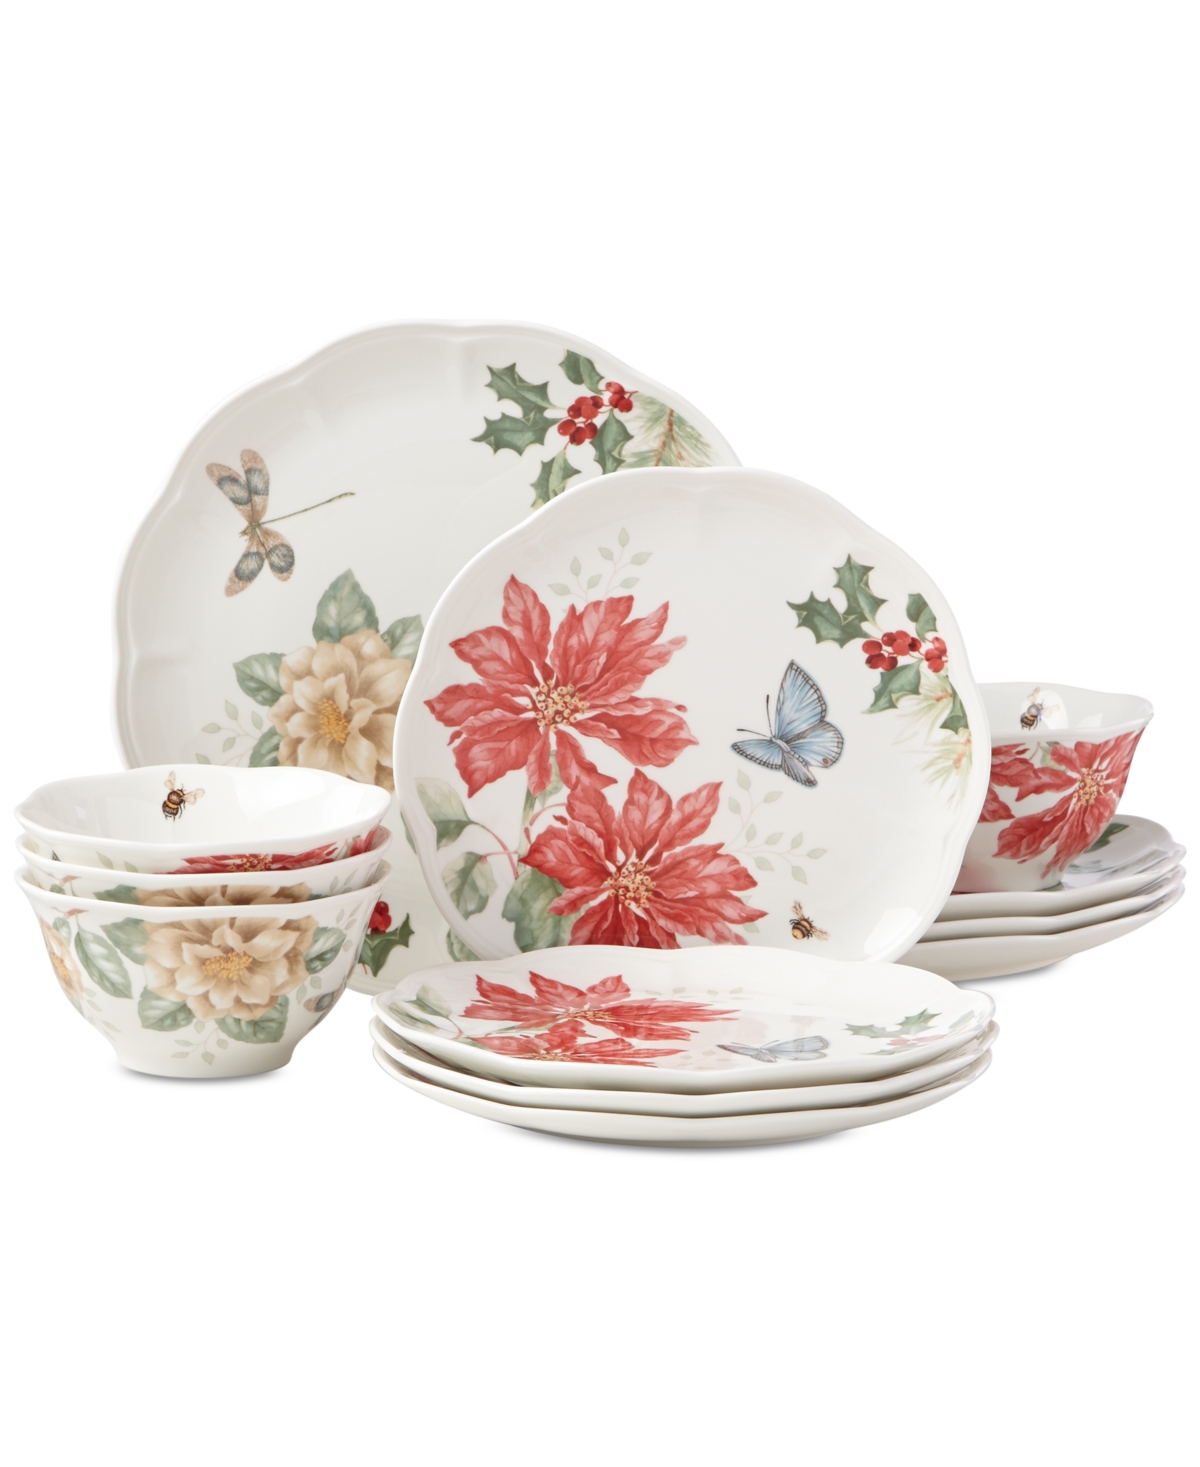 Butterfly Meadow Holiday 12 Pc. Dinnerware Set, Service for 4, Created for Macy's - White Porcelain Body With Multi Color De